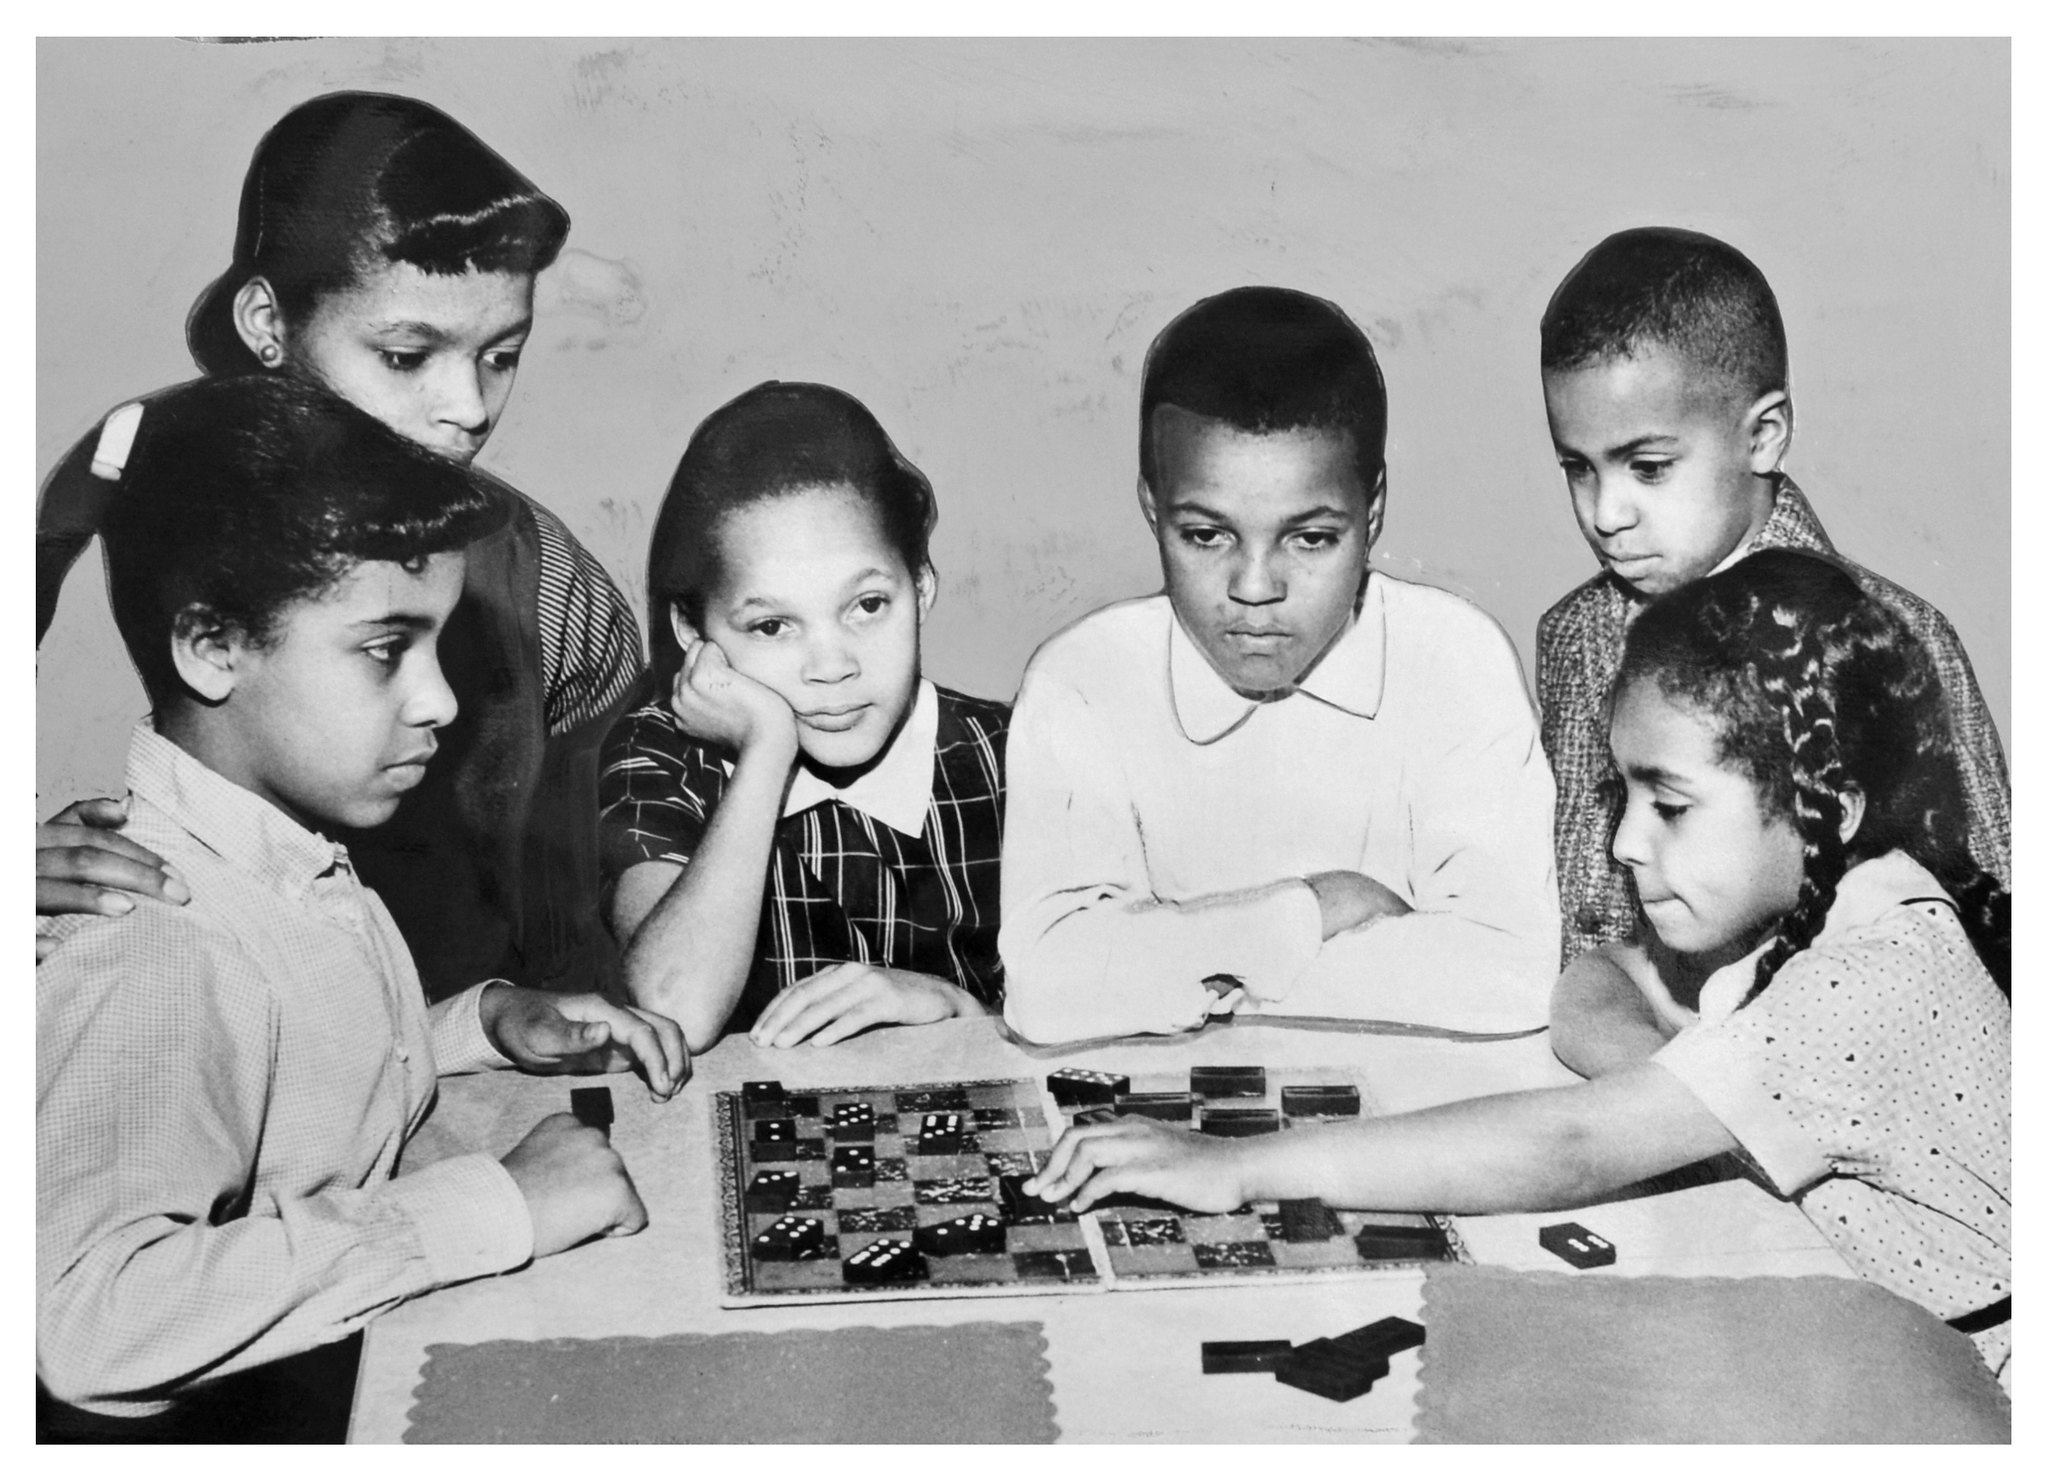 Students affected by an upcoming court order to end segregation in Alexandria public schools play together on February 4, 1959, days before entering formerly all-white schools. Source: DC Public Library, Star Collection © Washington Post.